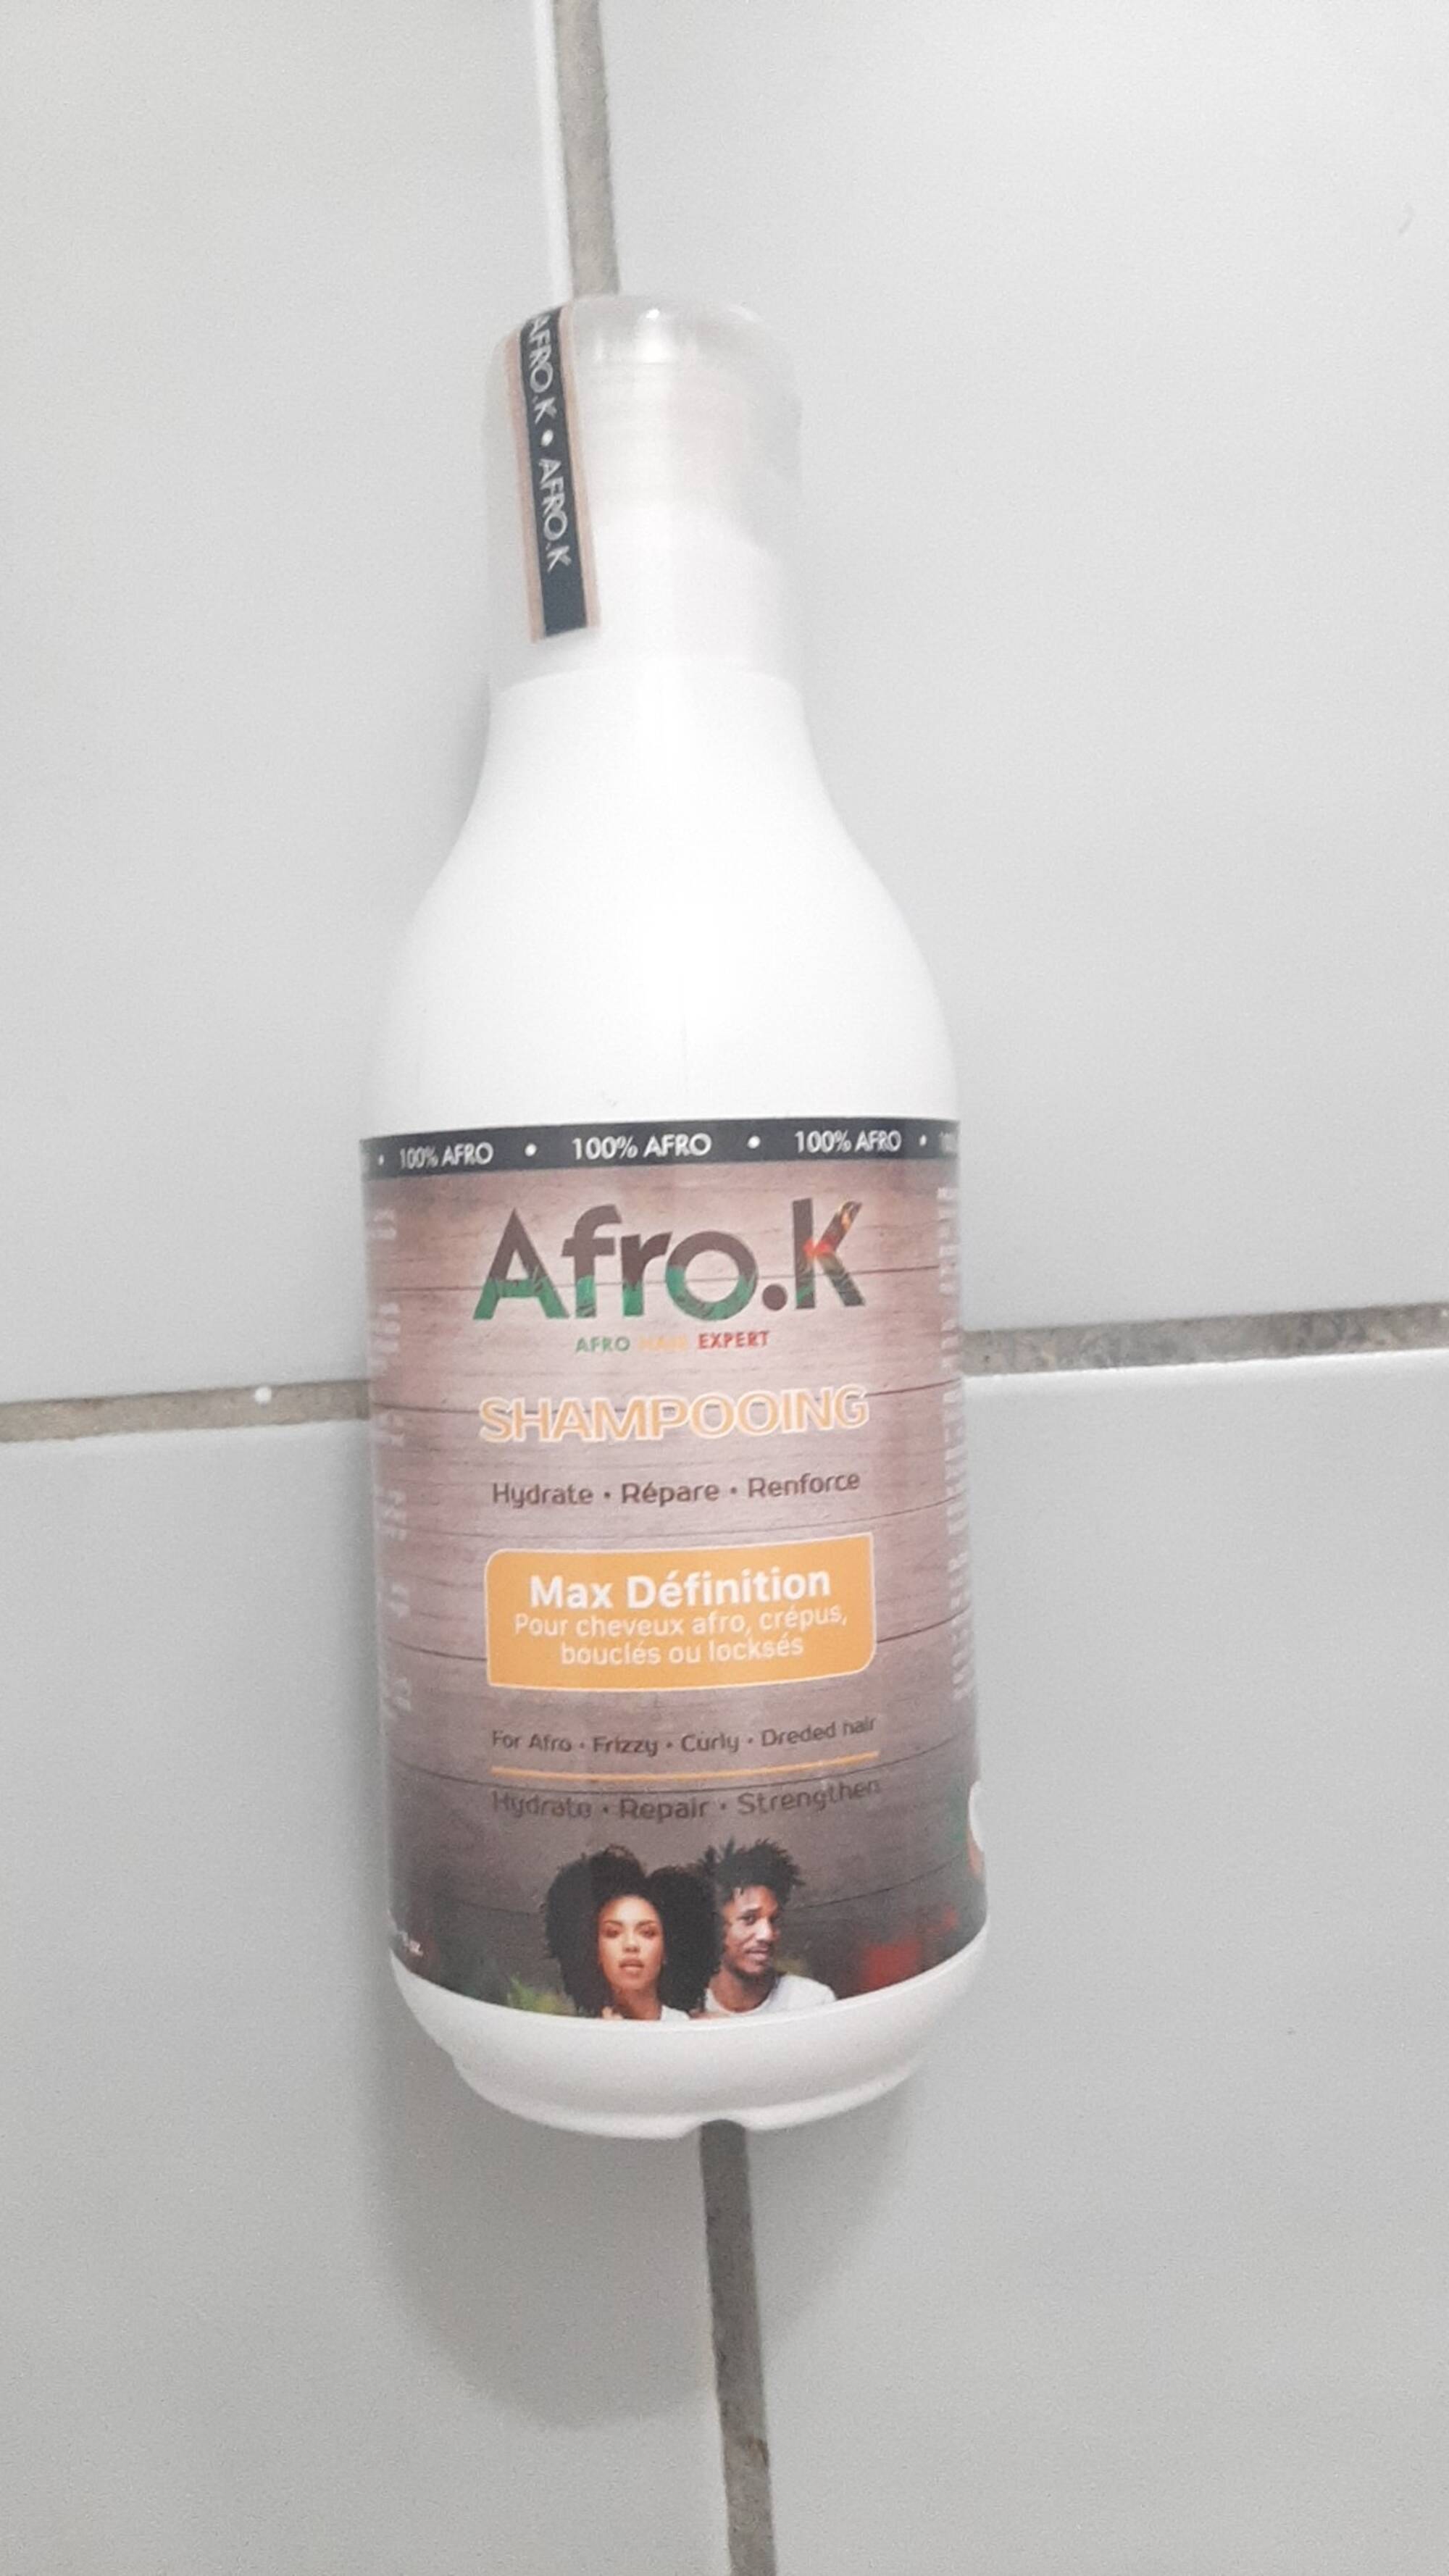 AFRO.K - Shampooing max définition